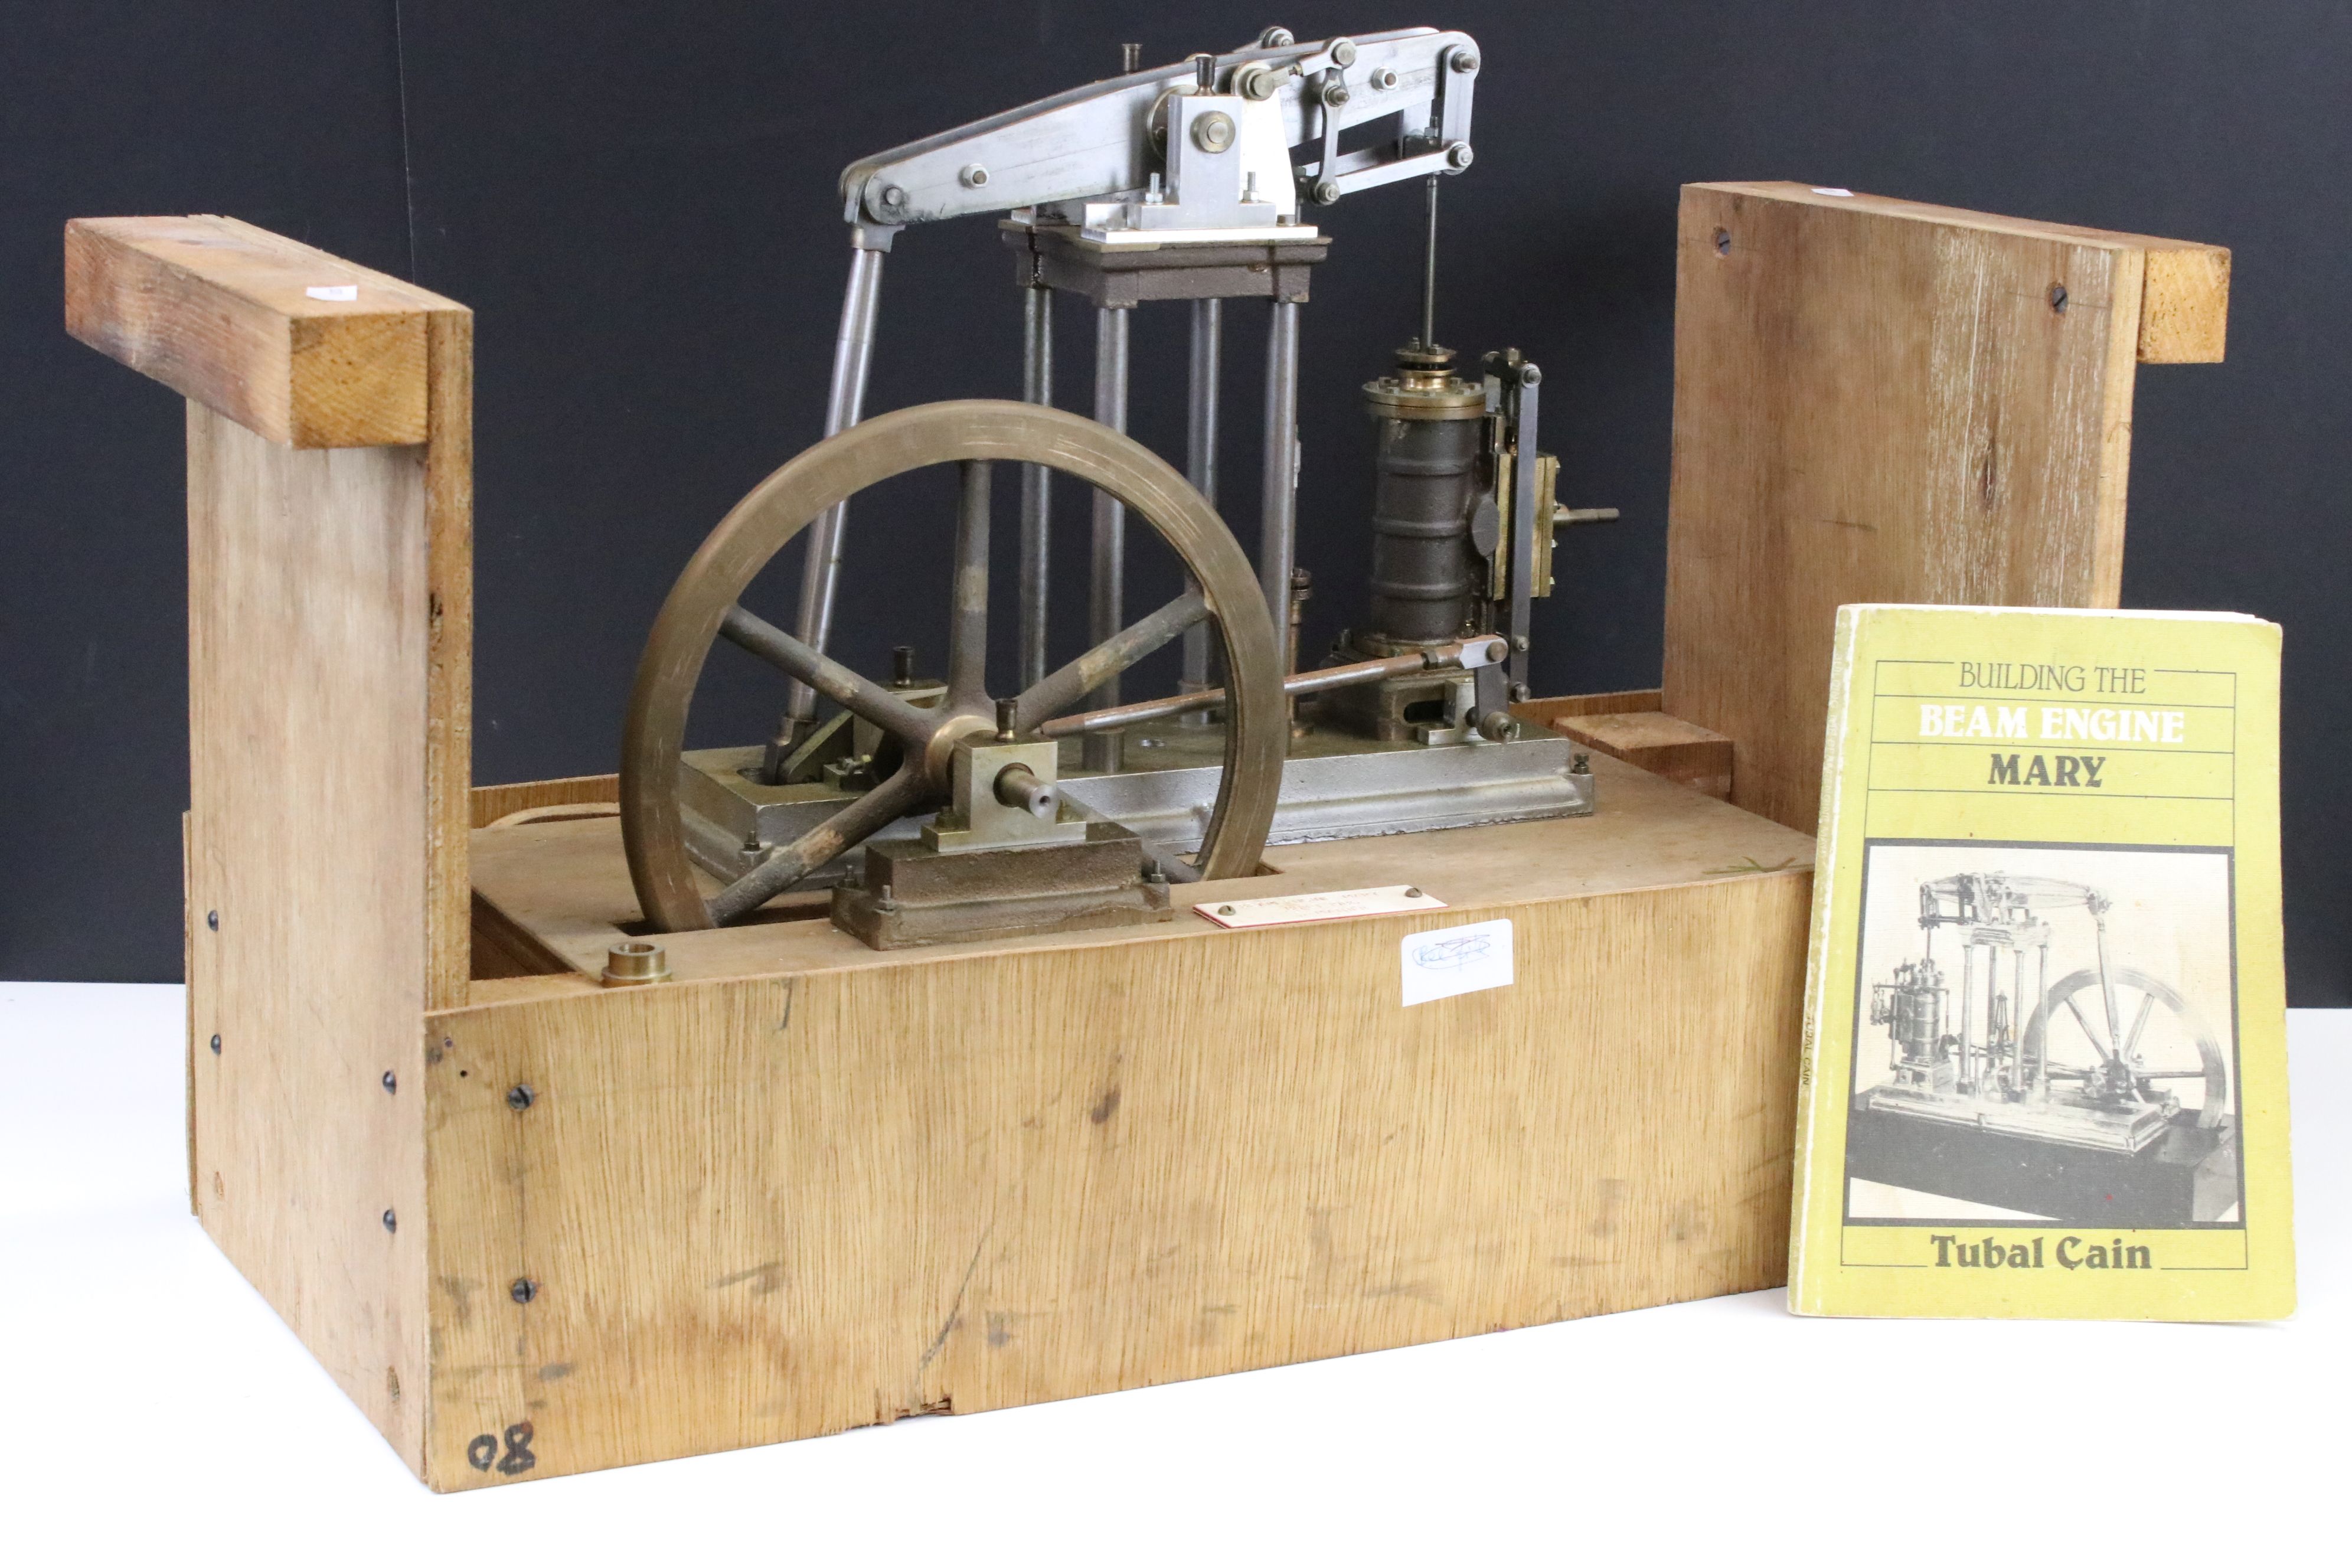 Live Steam - 'Mary' Four-Column Beam Engine, built in 1986 by S. Mather, with parallel motion and